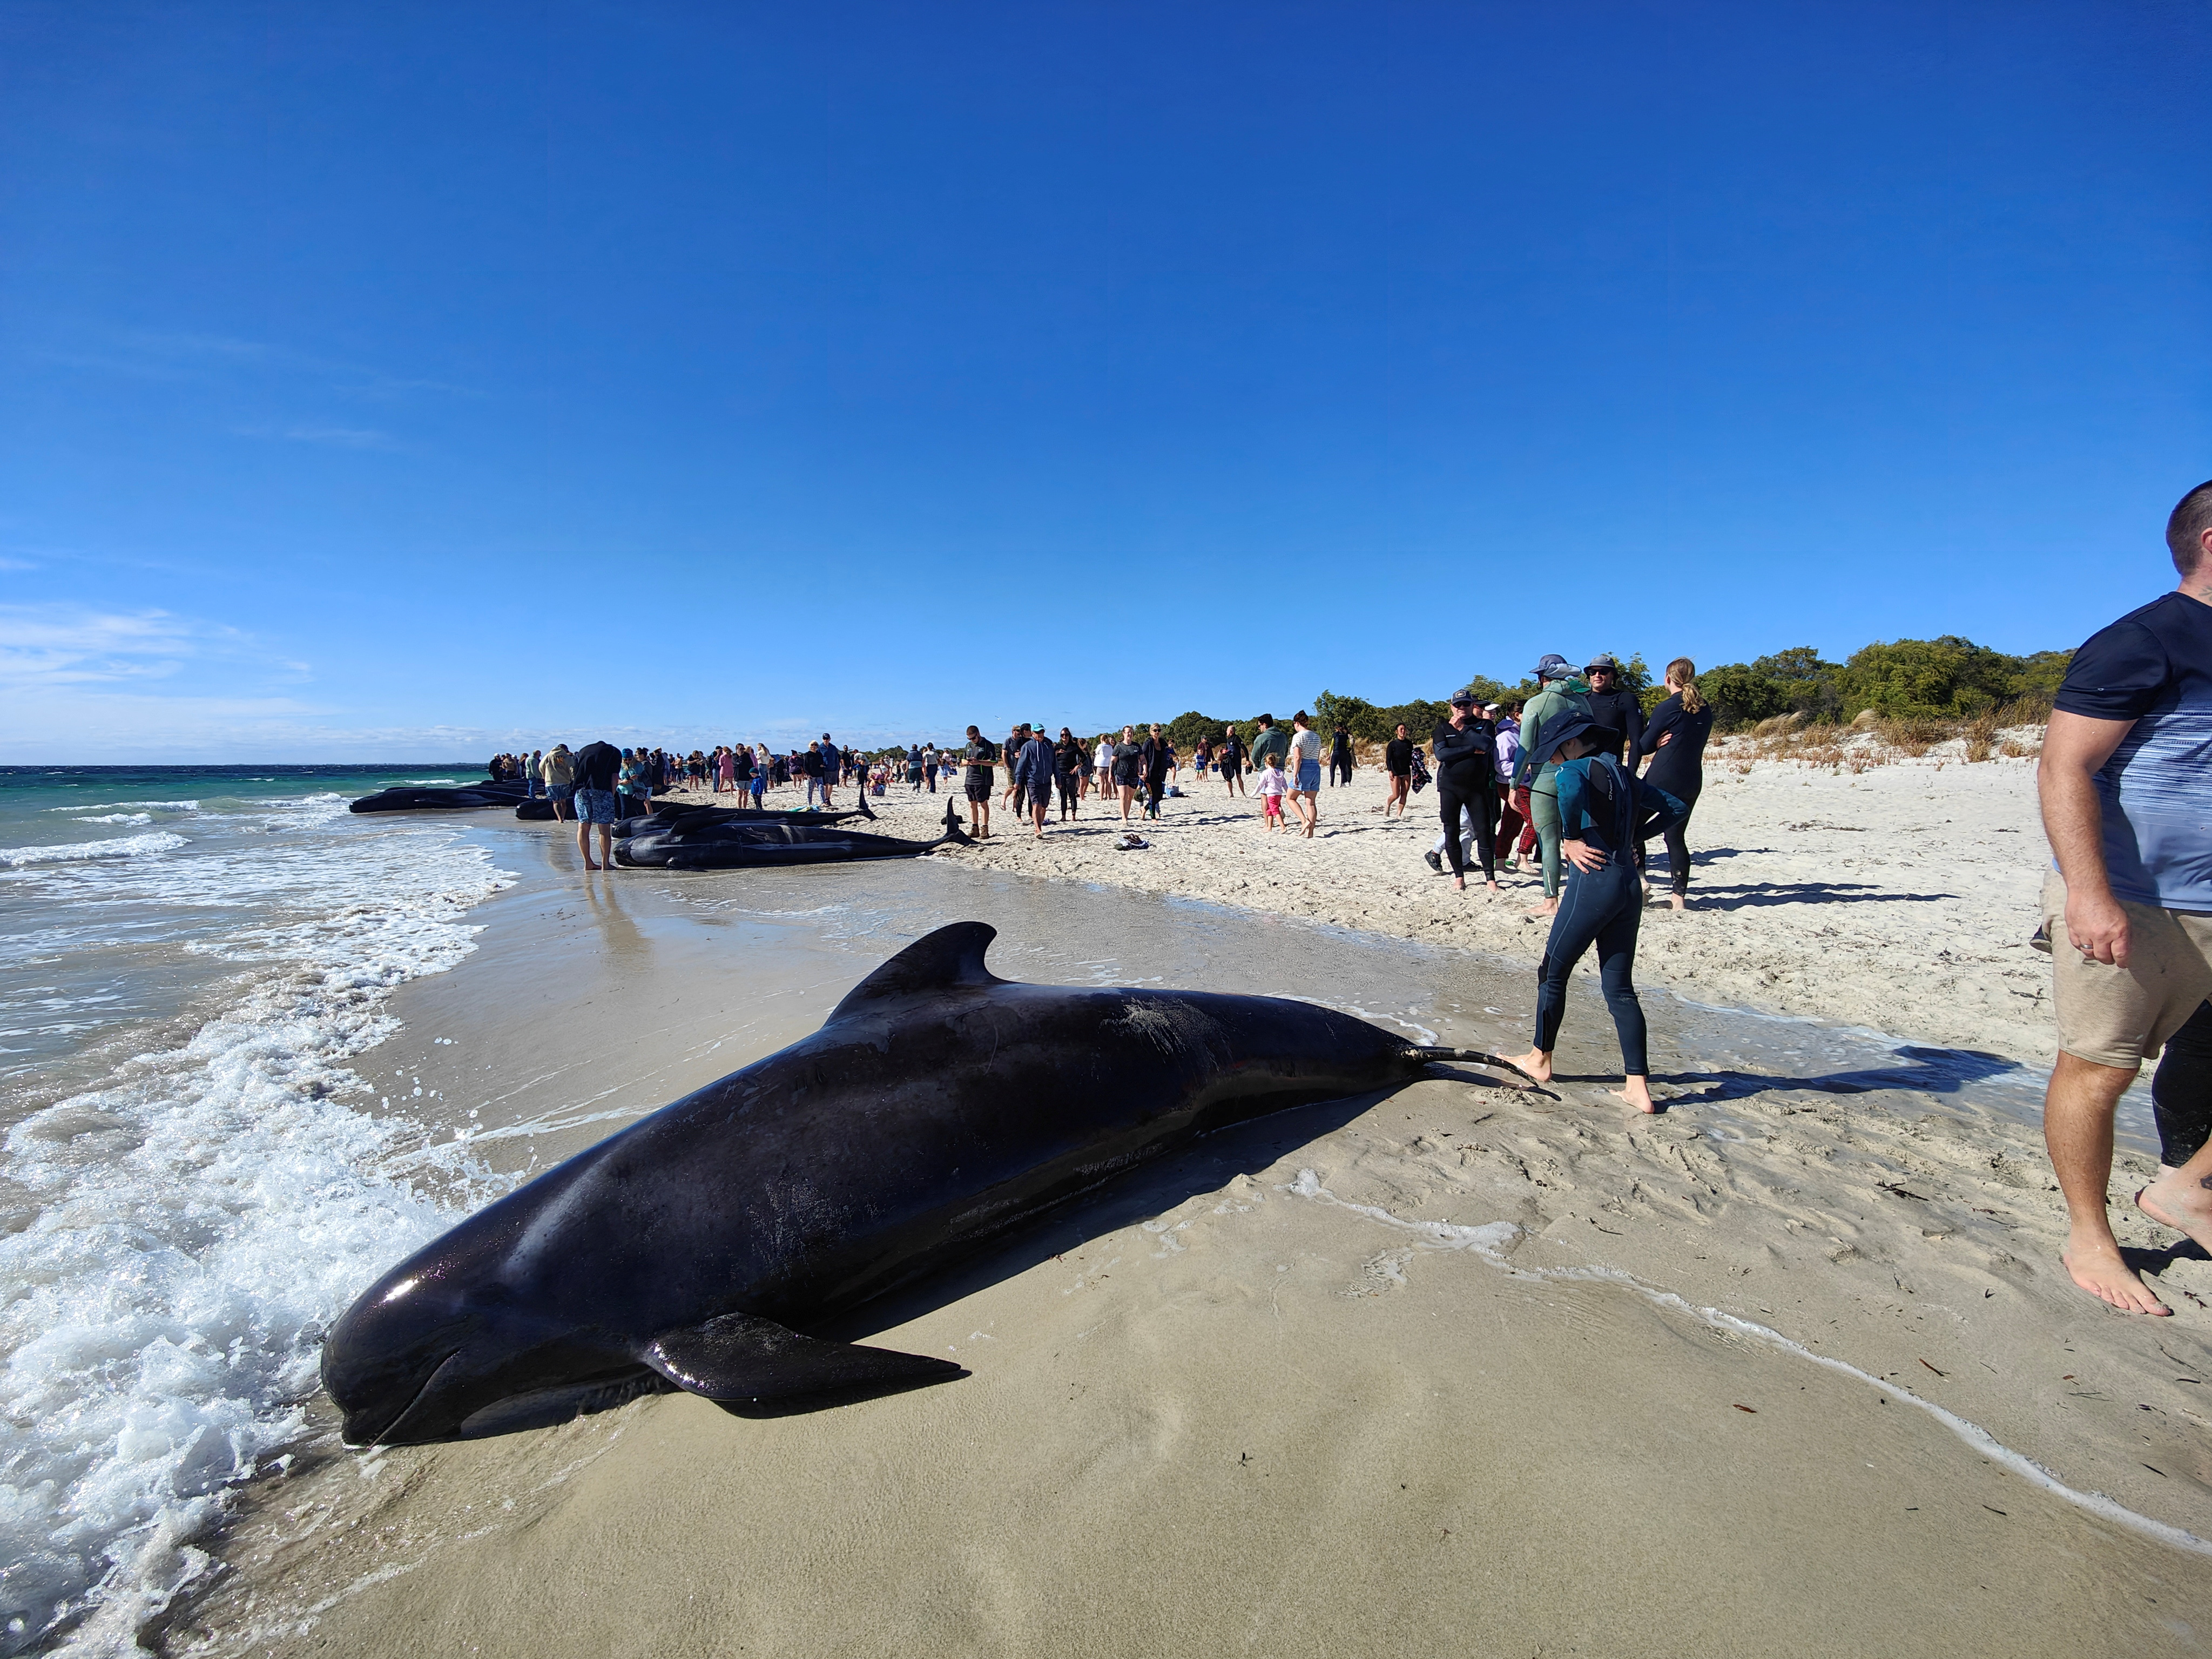 People walk near whales stranded on a beach at Toby's Inlet, Dunsborough, Australia.